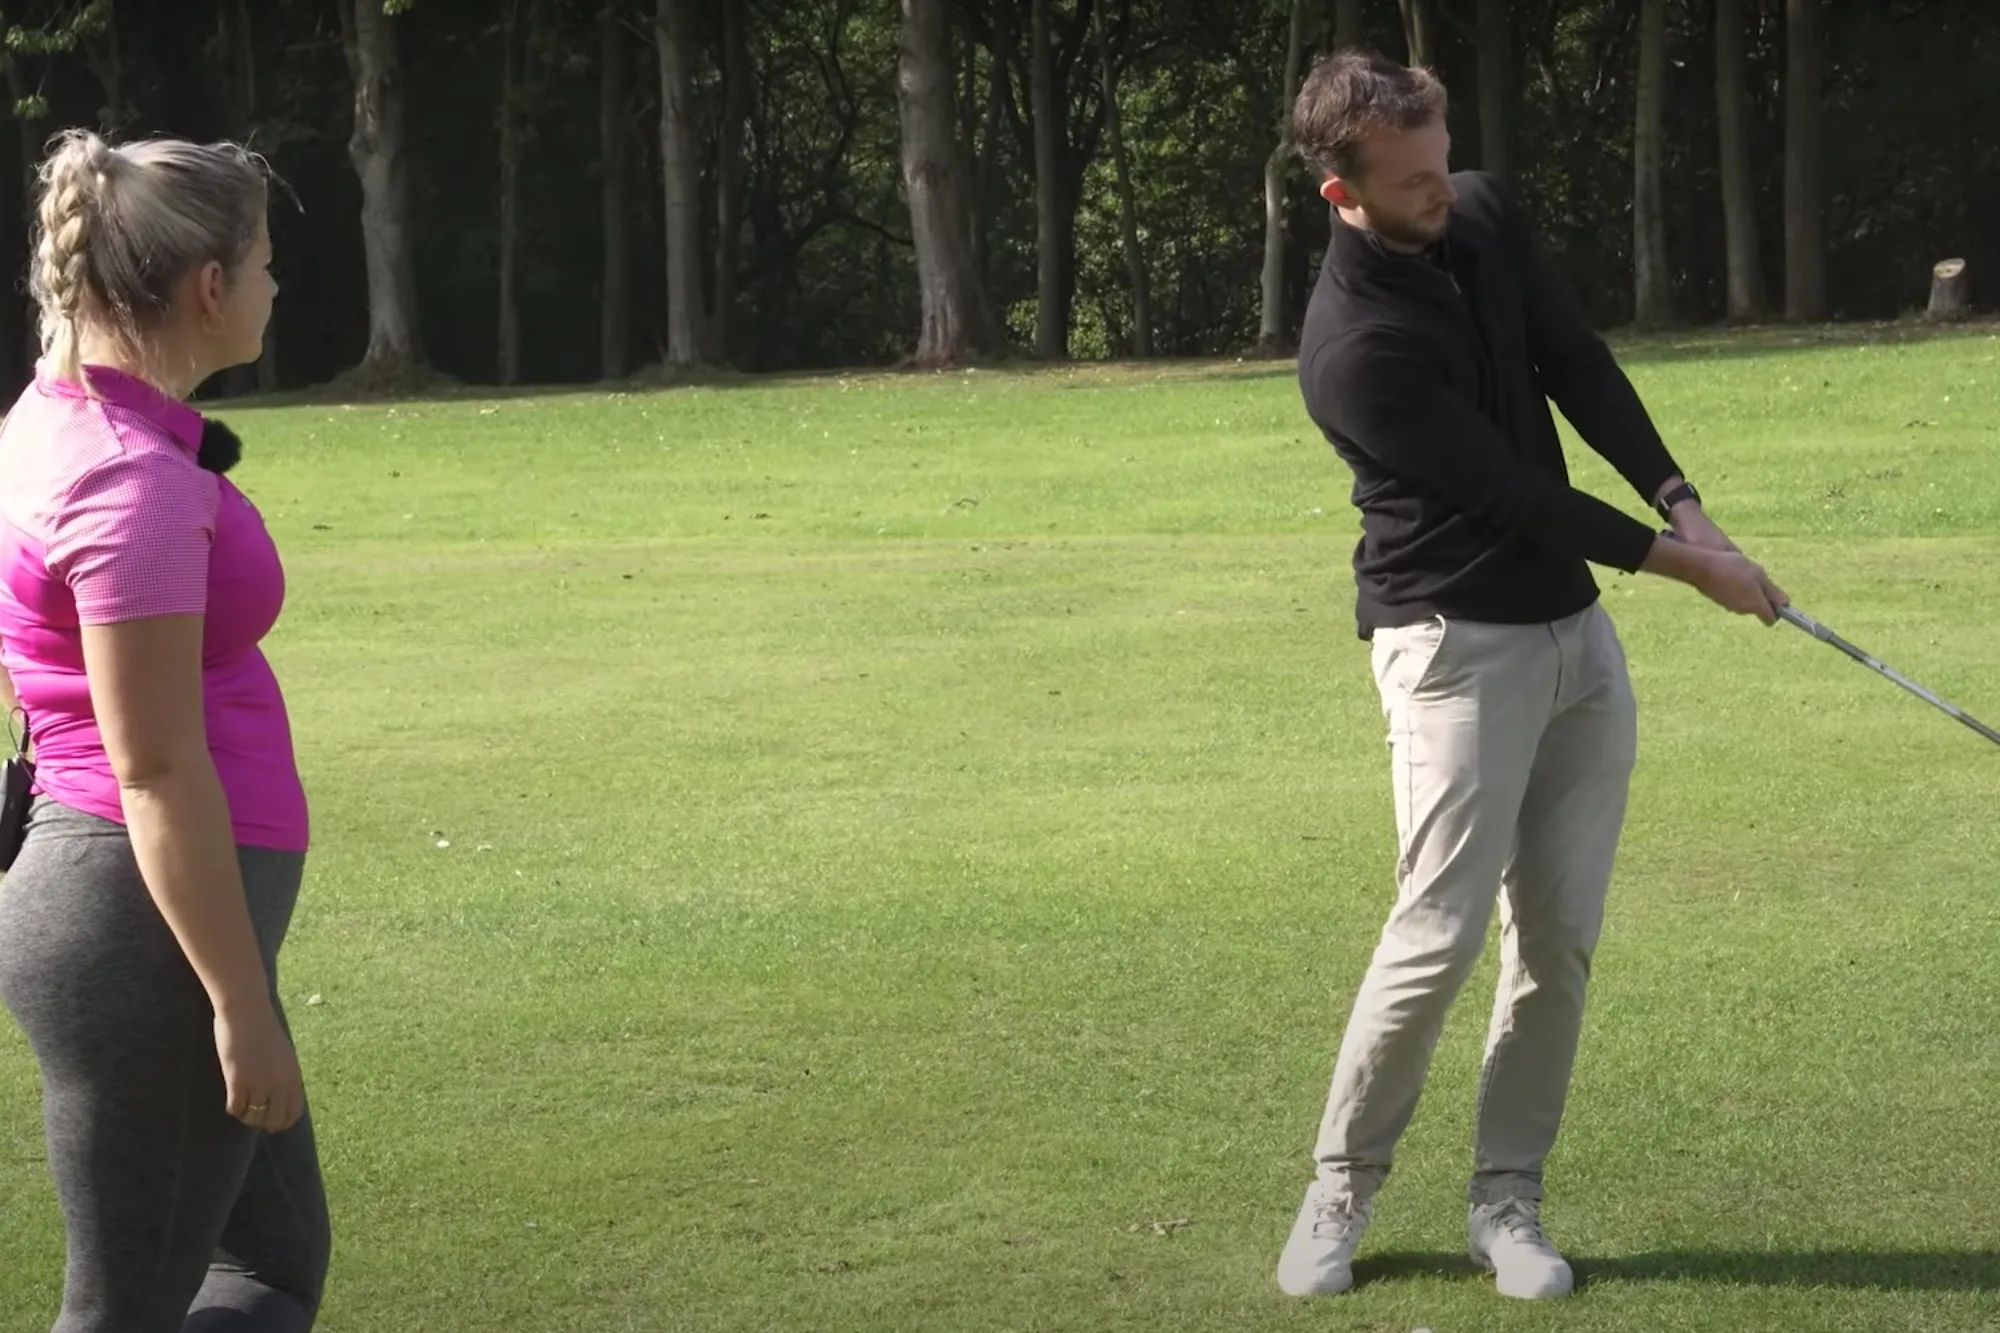 How To Use The Bounce To Improve Your Chipping - done